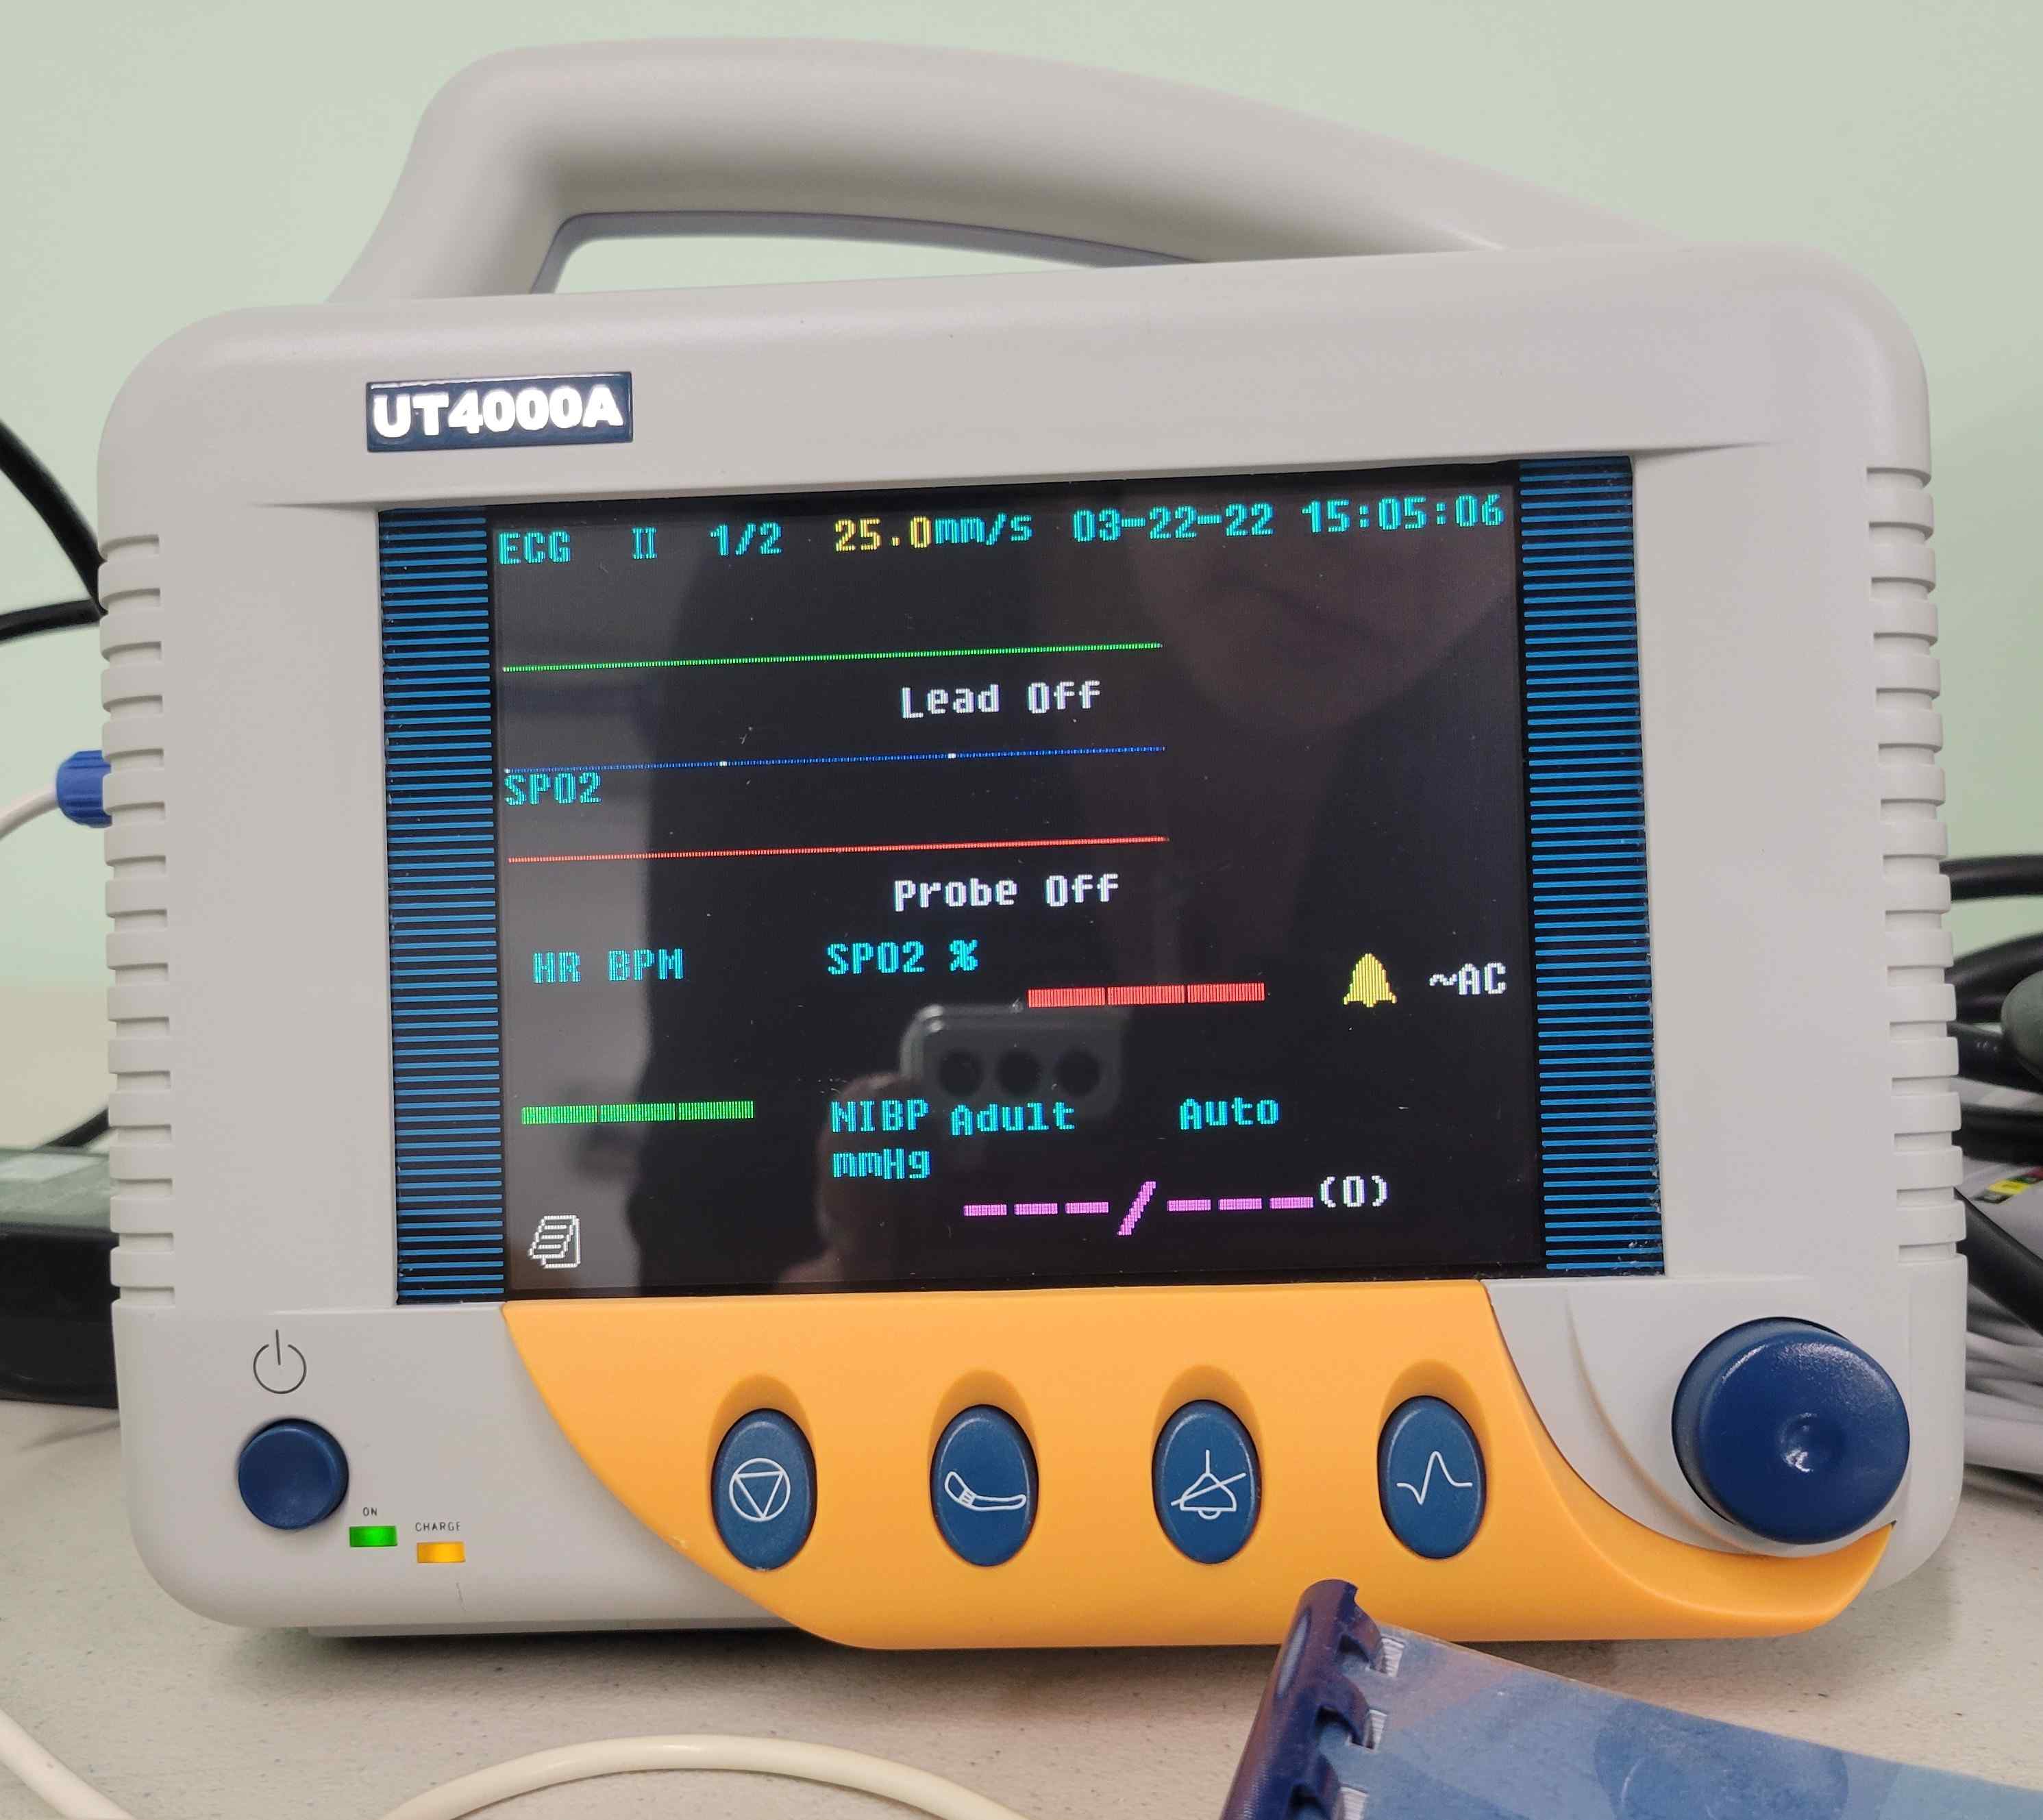 Goldway UT4000A Patient Monitor